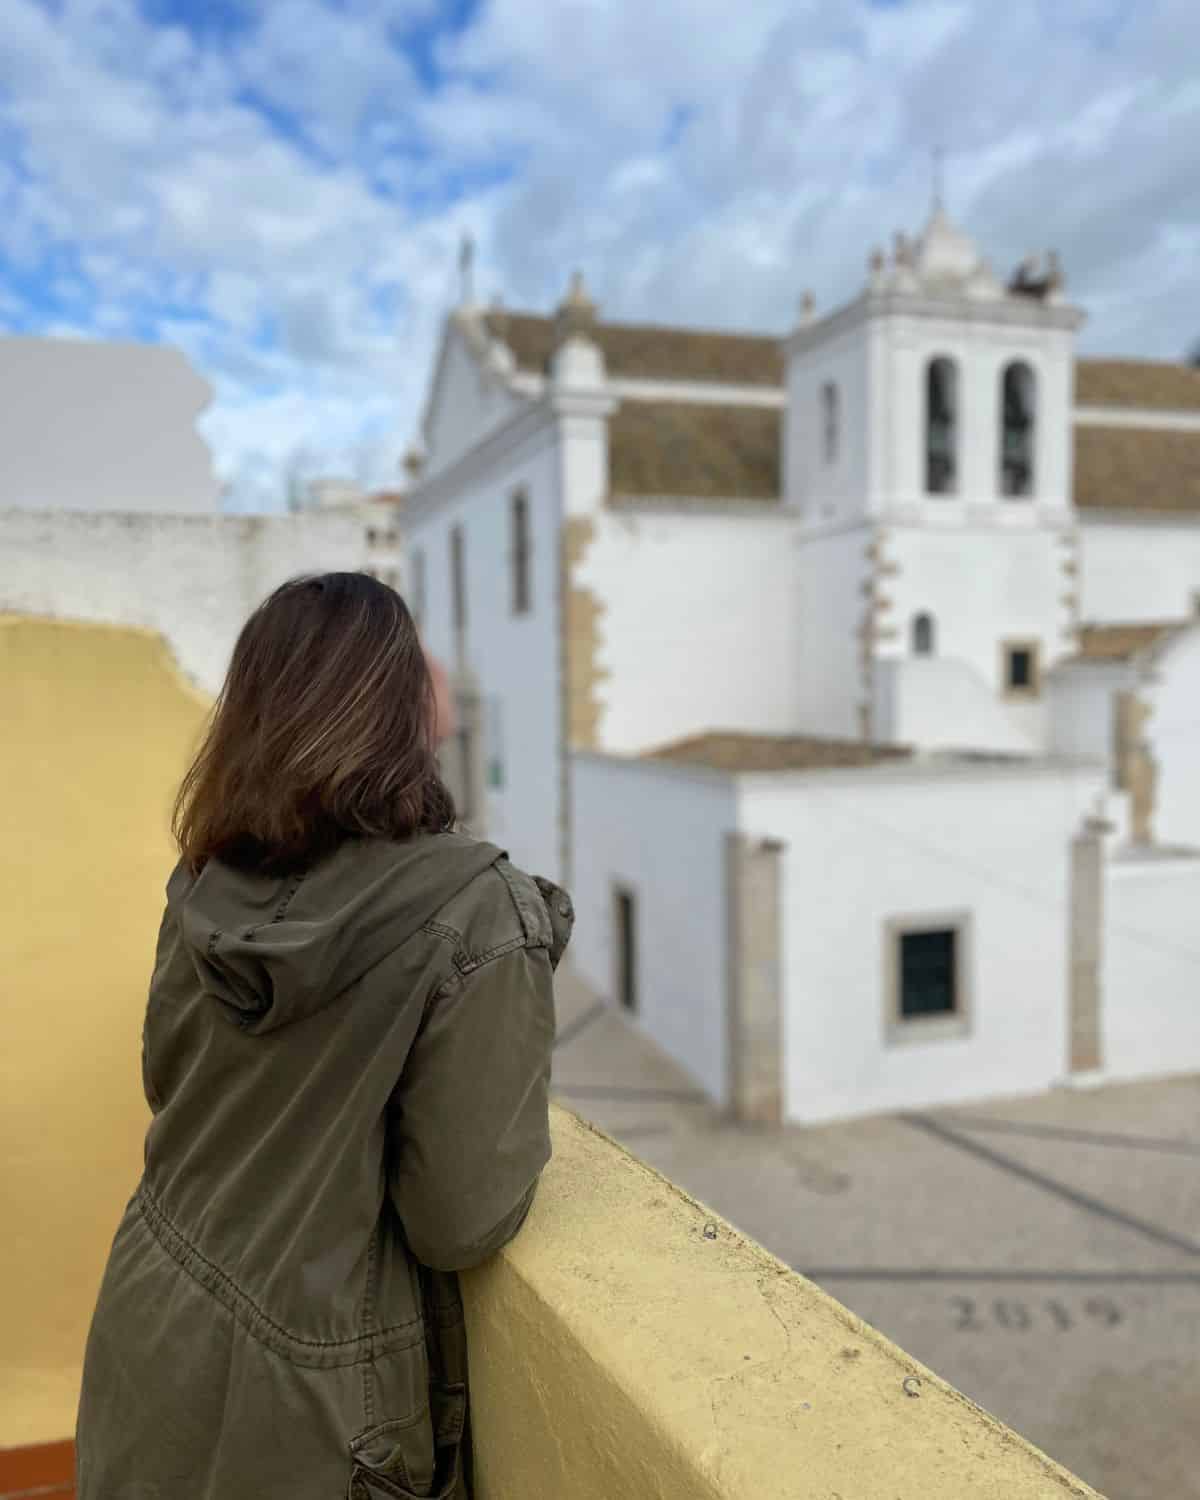 View from behind the traveler as she leans on a yellow wall, looking out towards a quaint Faro neighborhood with traditional white buildings and a church with two bell towers, under a bright blue sky with scattered clouds.